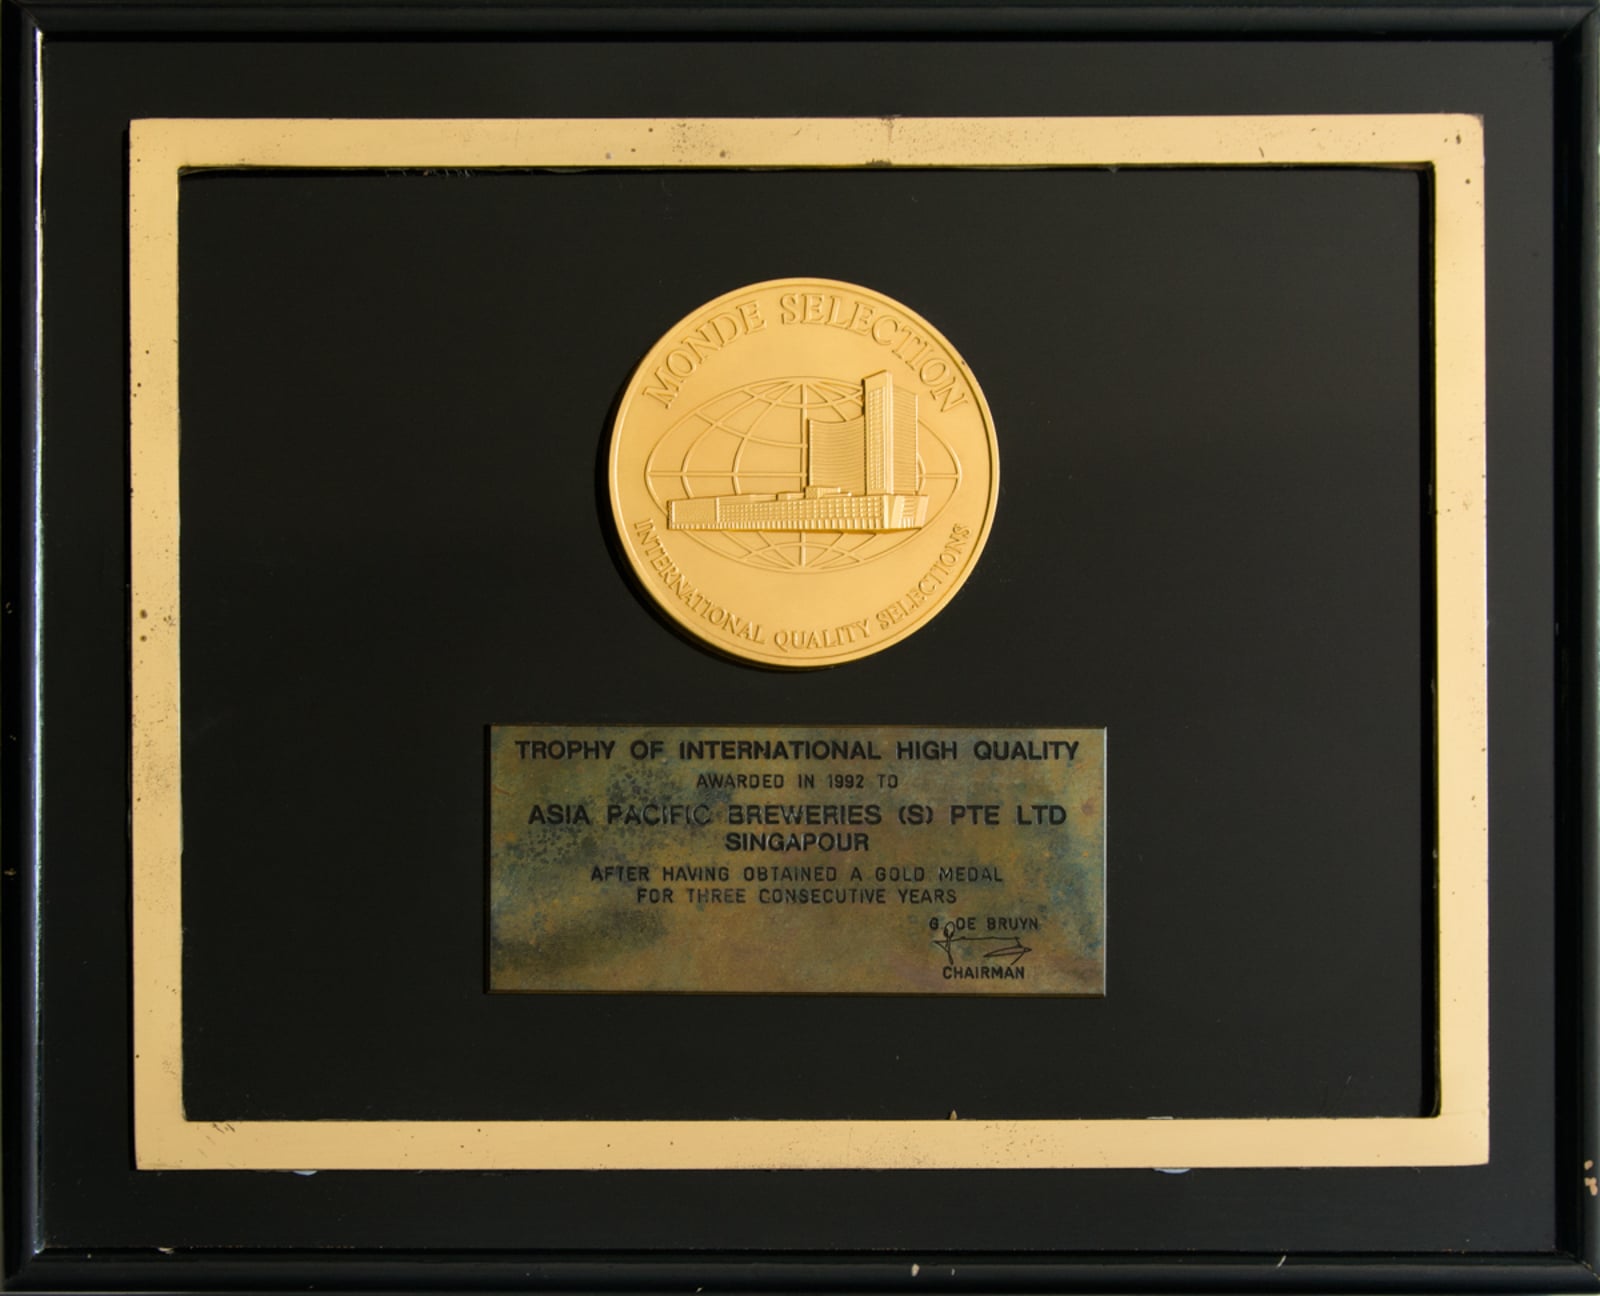 Monde Selection: Trophy of International High Quality to APBS, Medal 1992